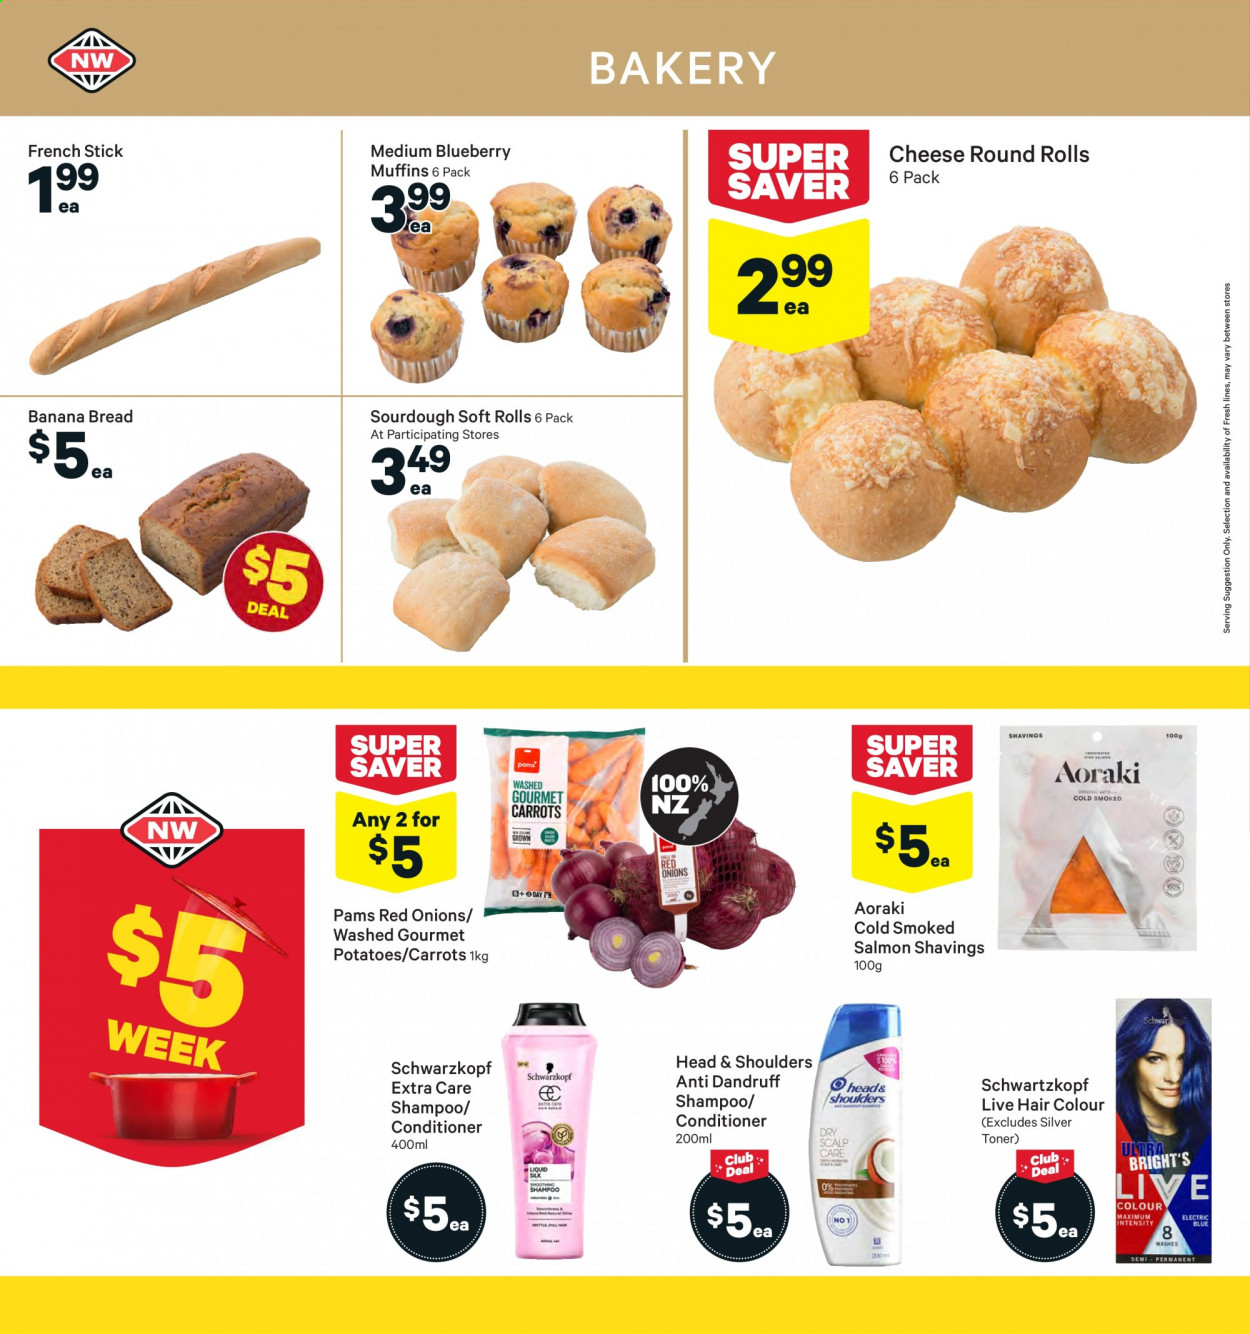 thumbnail - New World mailer - 12.07.2021 - 18.07.2021 - Sales products - bread, muffin, banana bread, carrots, red onions, potatoes, onion, salmon, smoked salmon, cheese, brie, Silk, cheese sticks, shampoo, Schwarzkopf, conditioner, Head & Shoulders, hair color. Page 12.